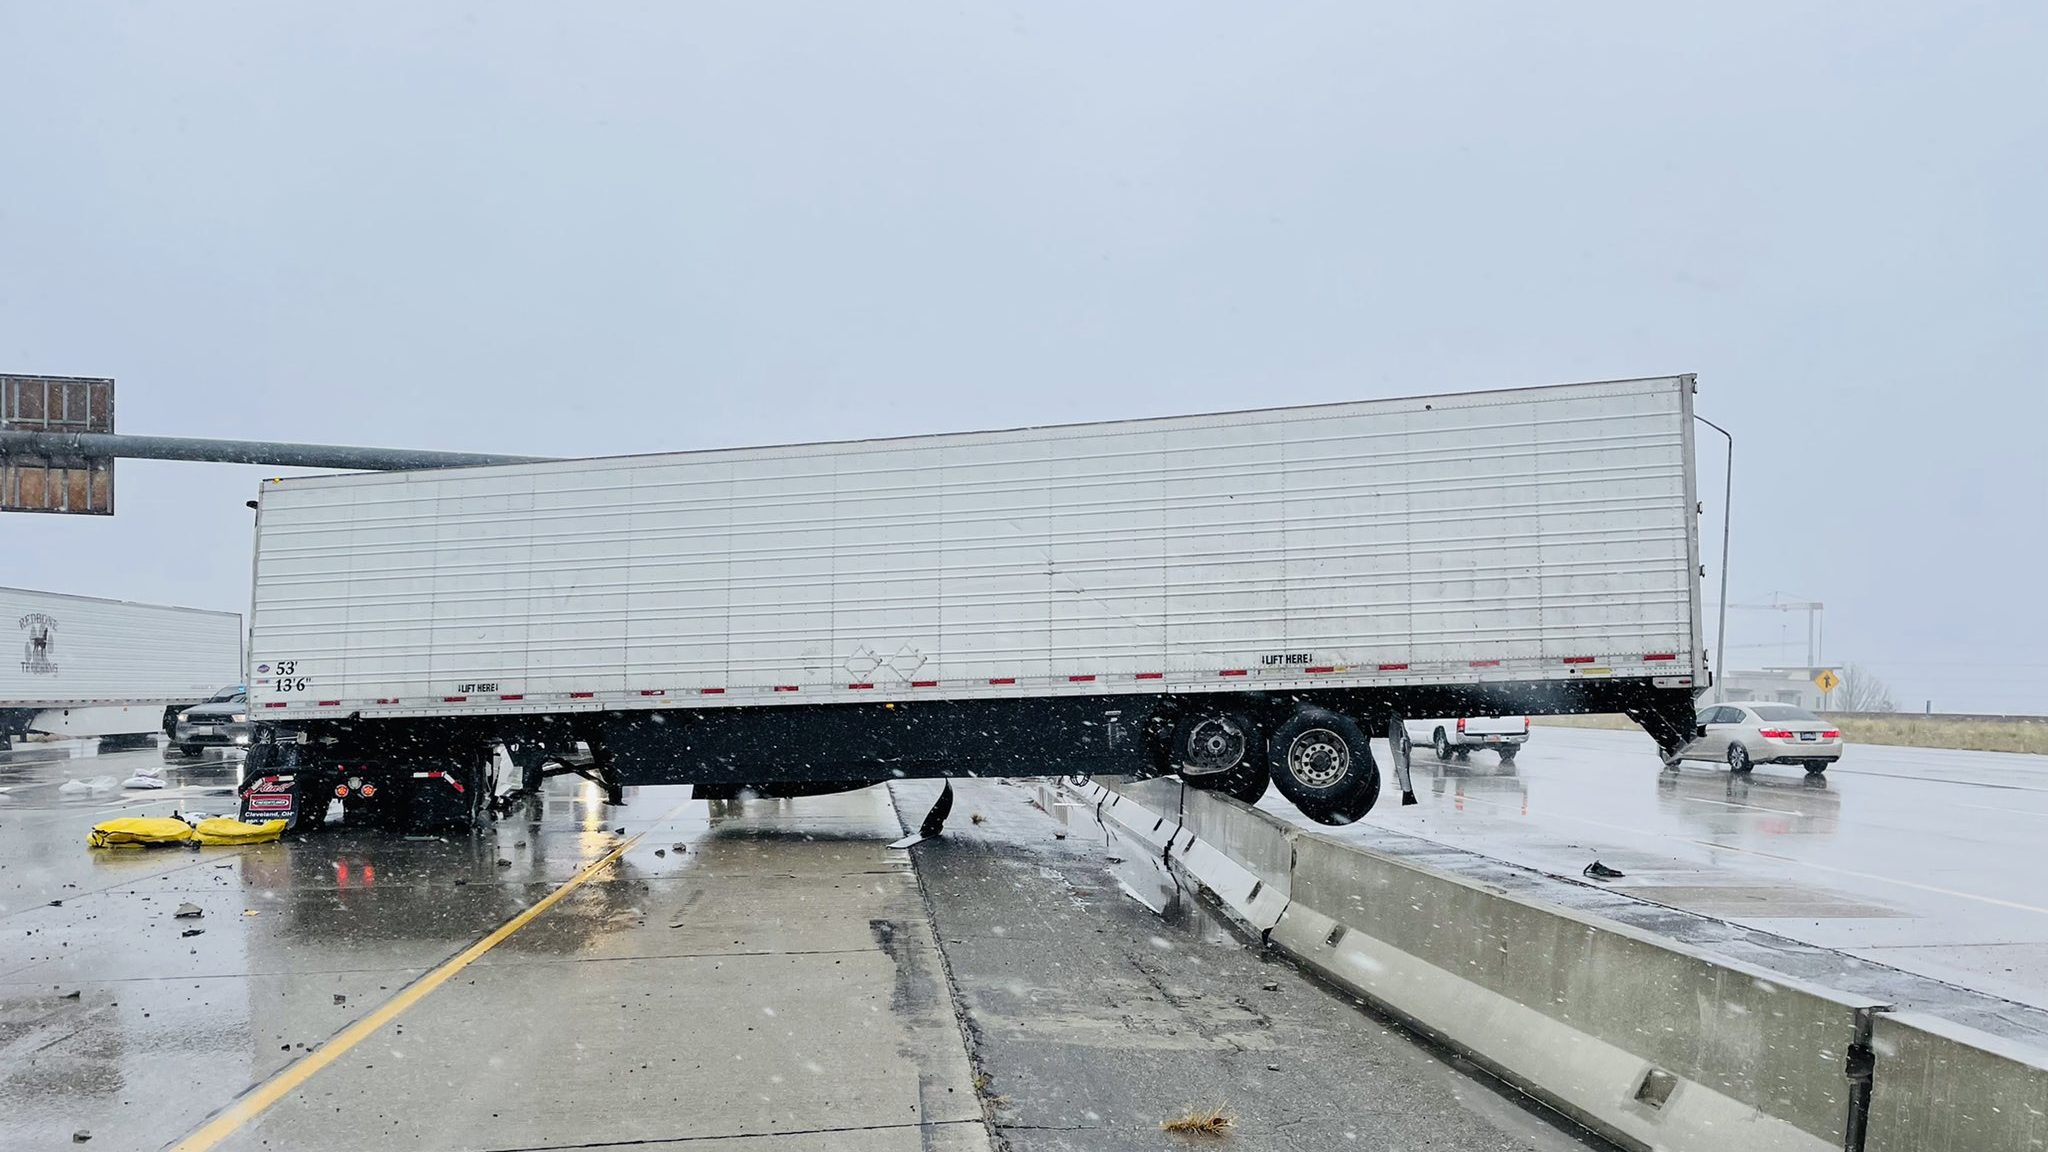 salt lake's first snow leads to jackknifed semi, other problems...